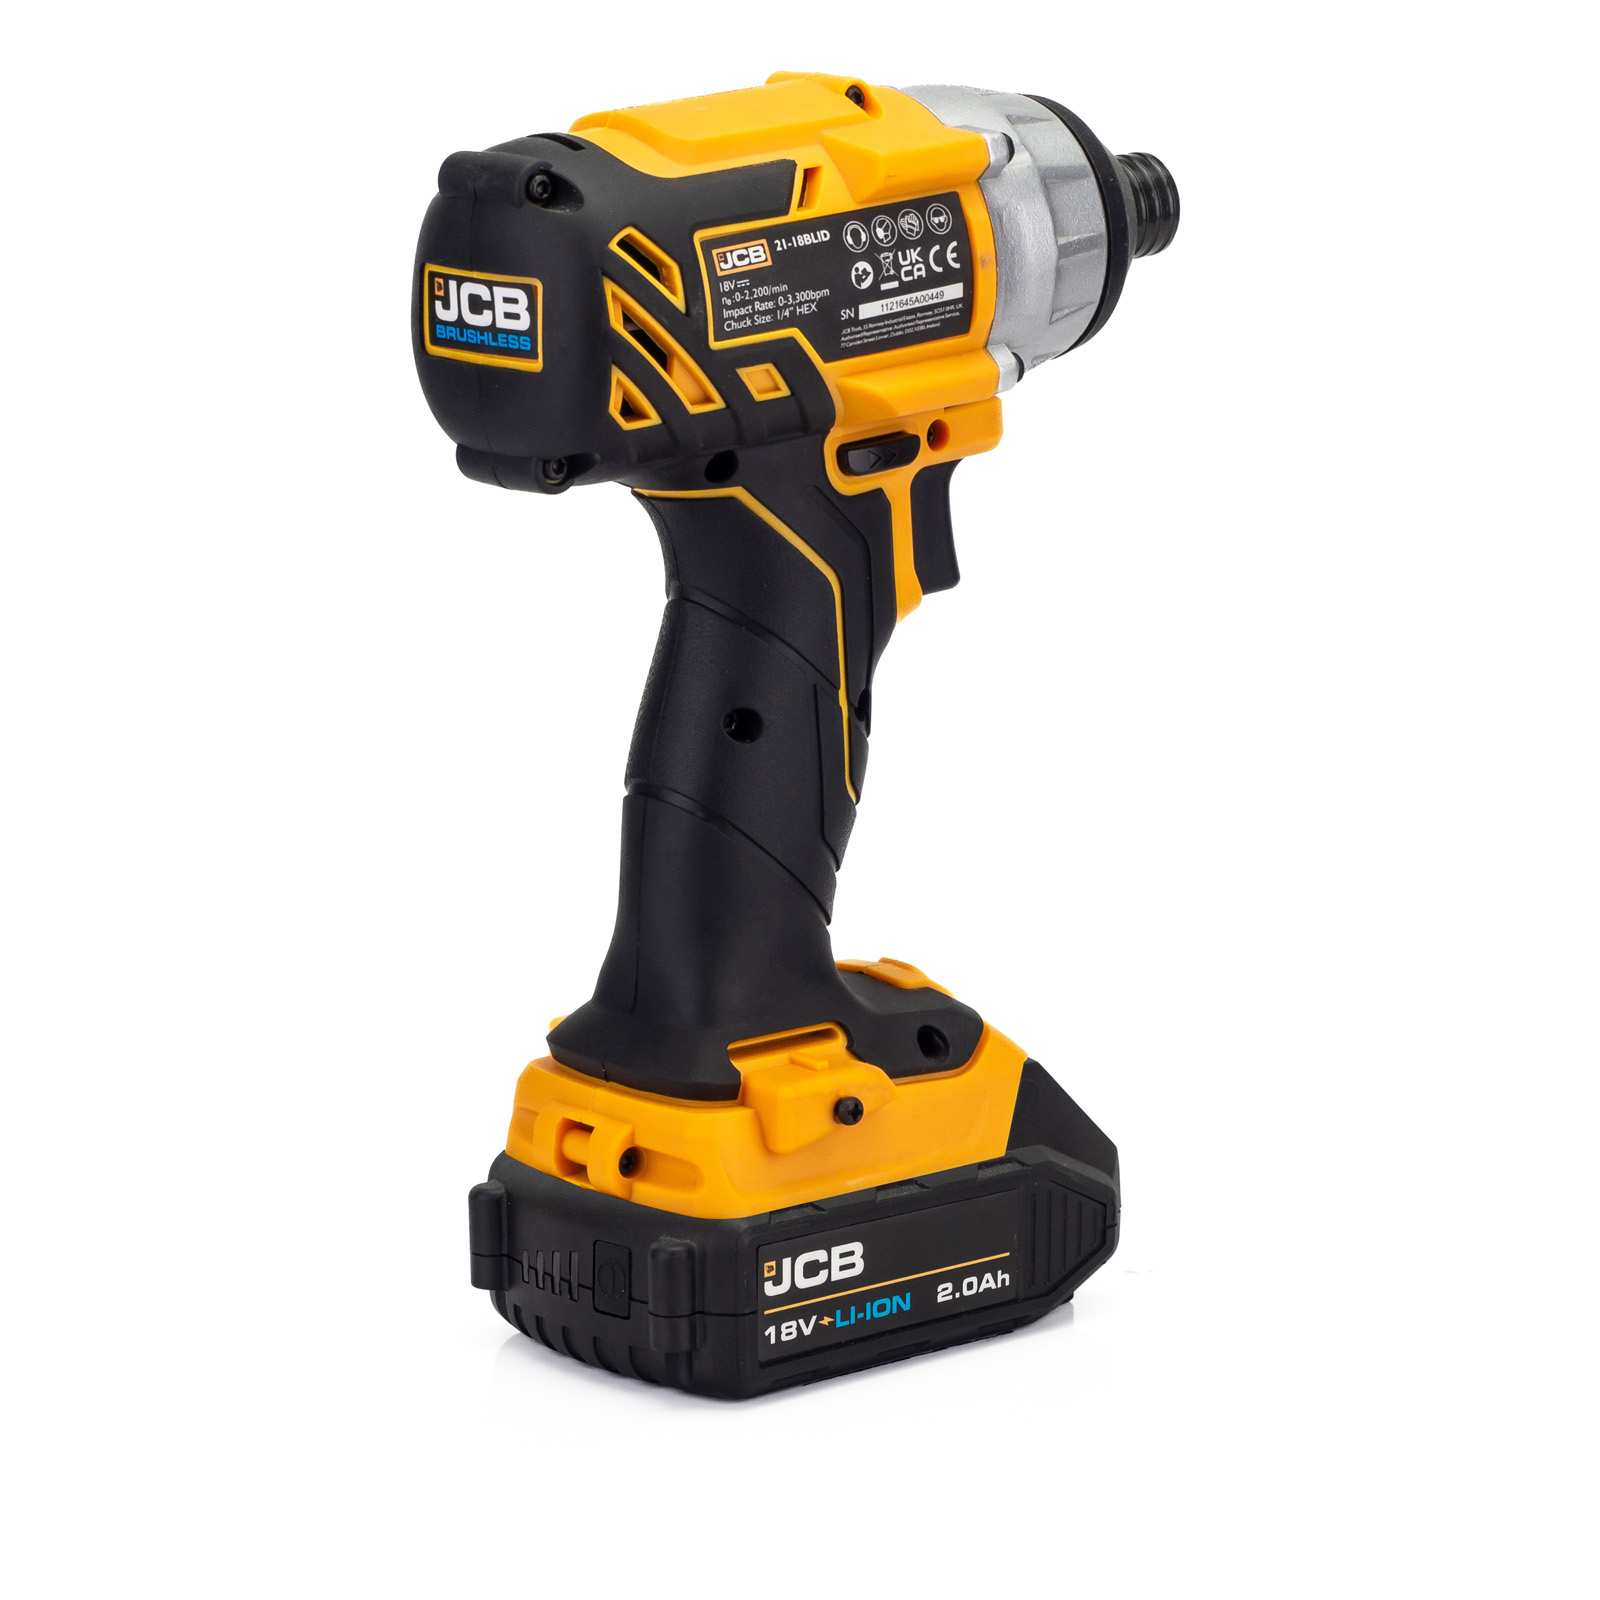 21 Volt 1/2-in Brushless Cordless Impact Wrench, Adjustable Speed